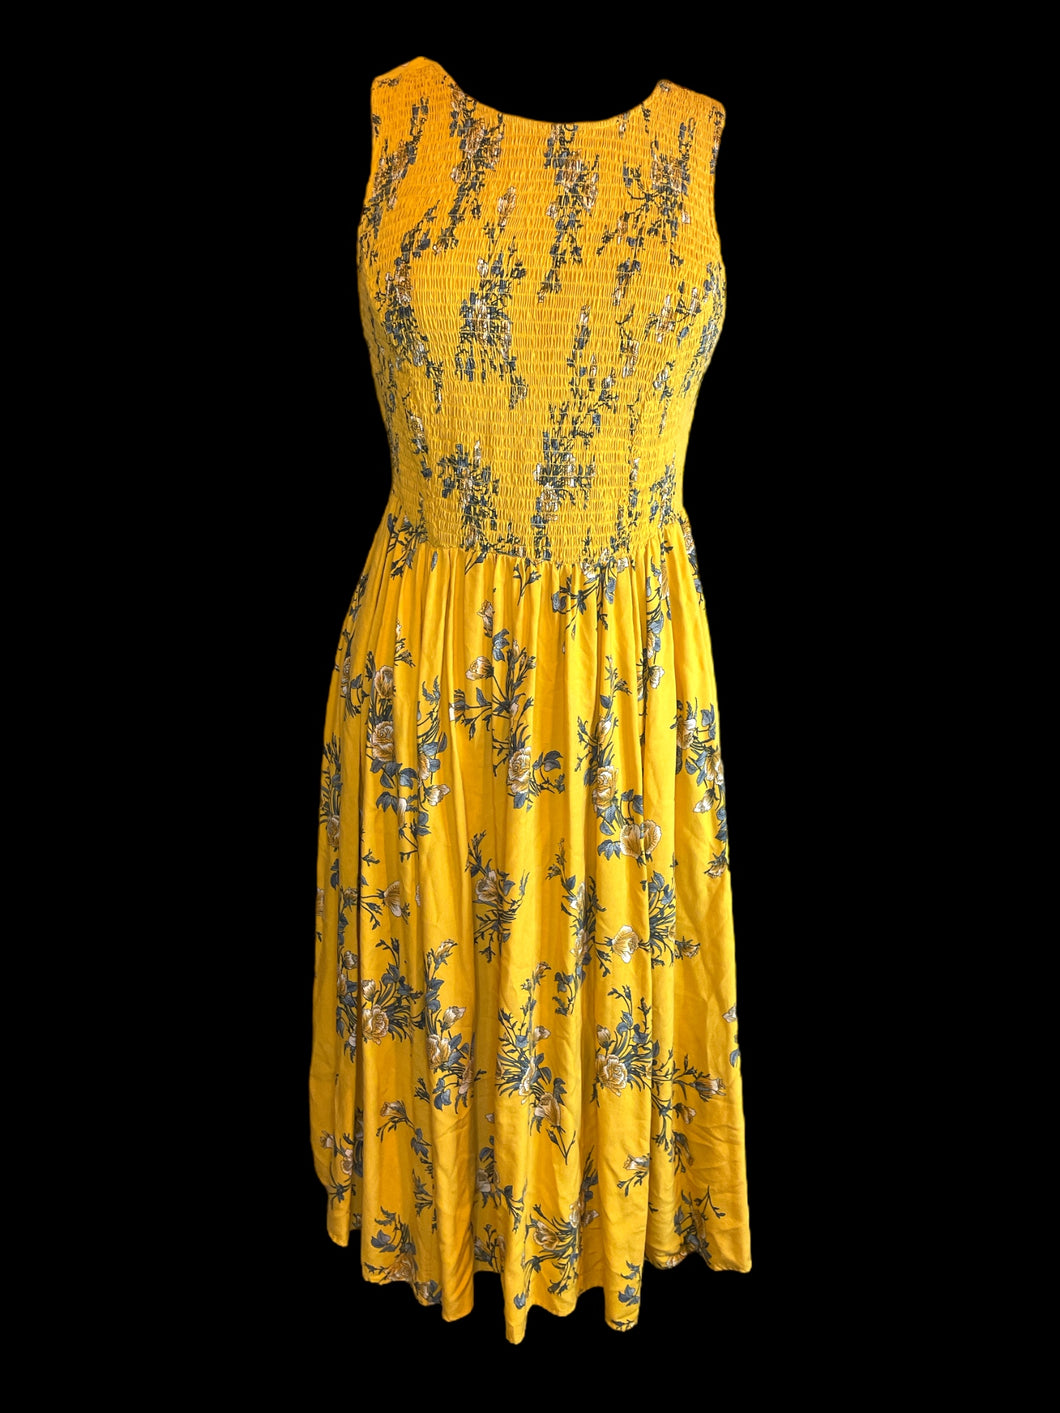 S Yellow & blue floral print sleeveless round neckline dress w/ shirred bodice, & button up back